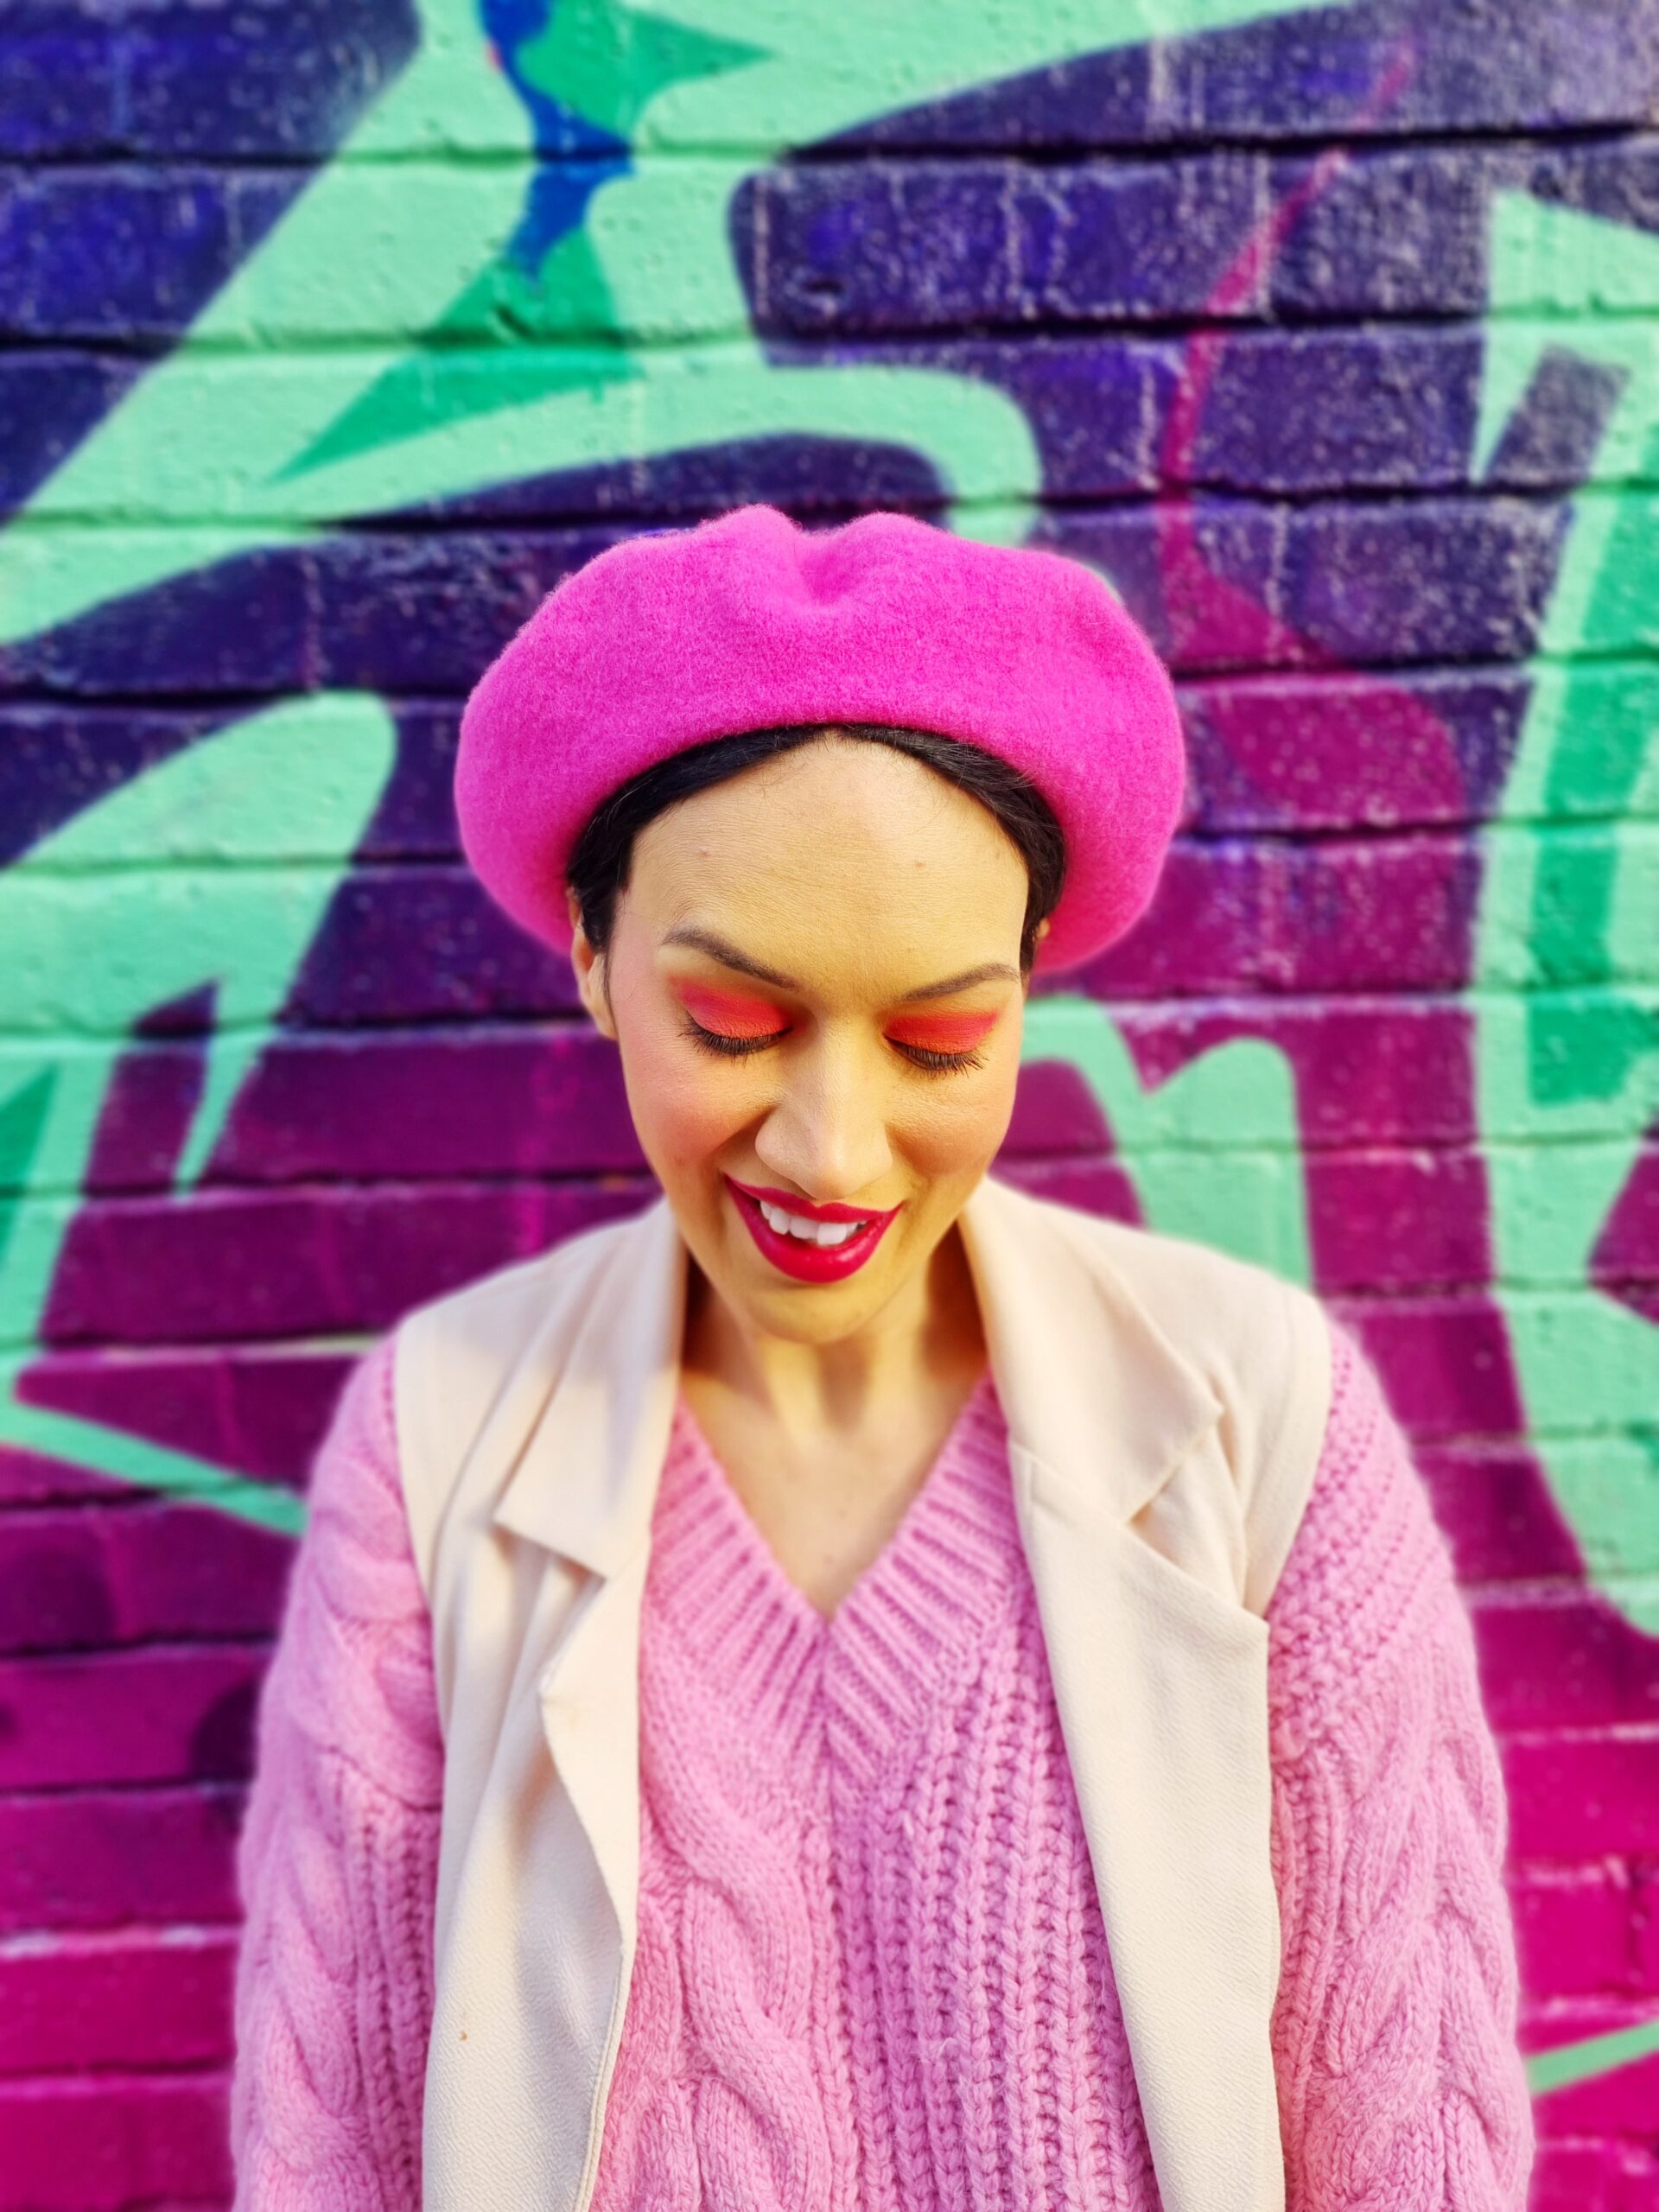 <img src="ana.jpg" alt="ana smiling in pink jumper colourful clothes"/>